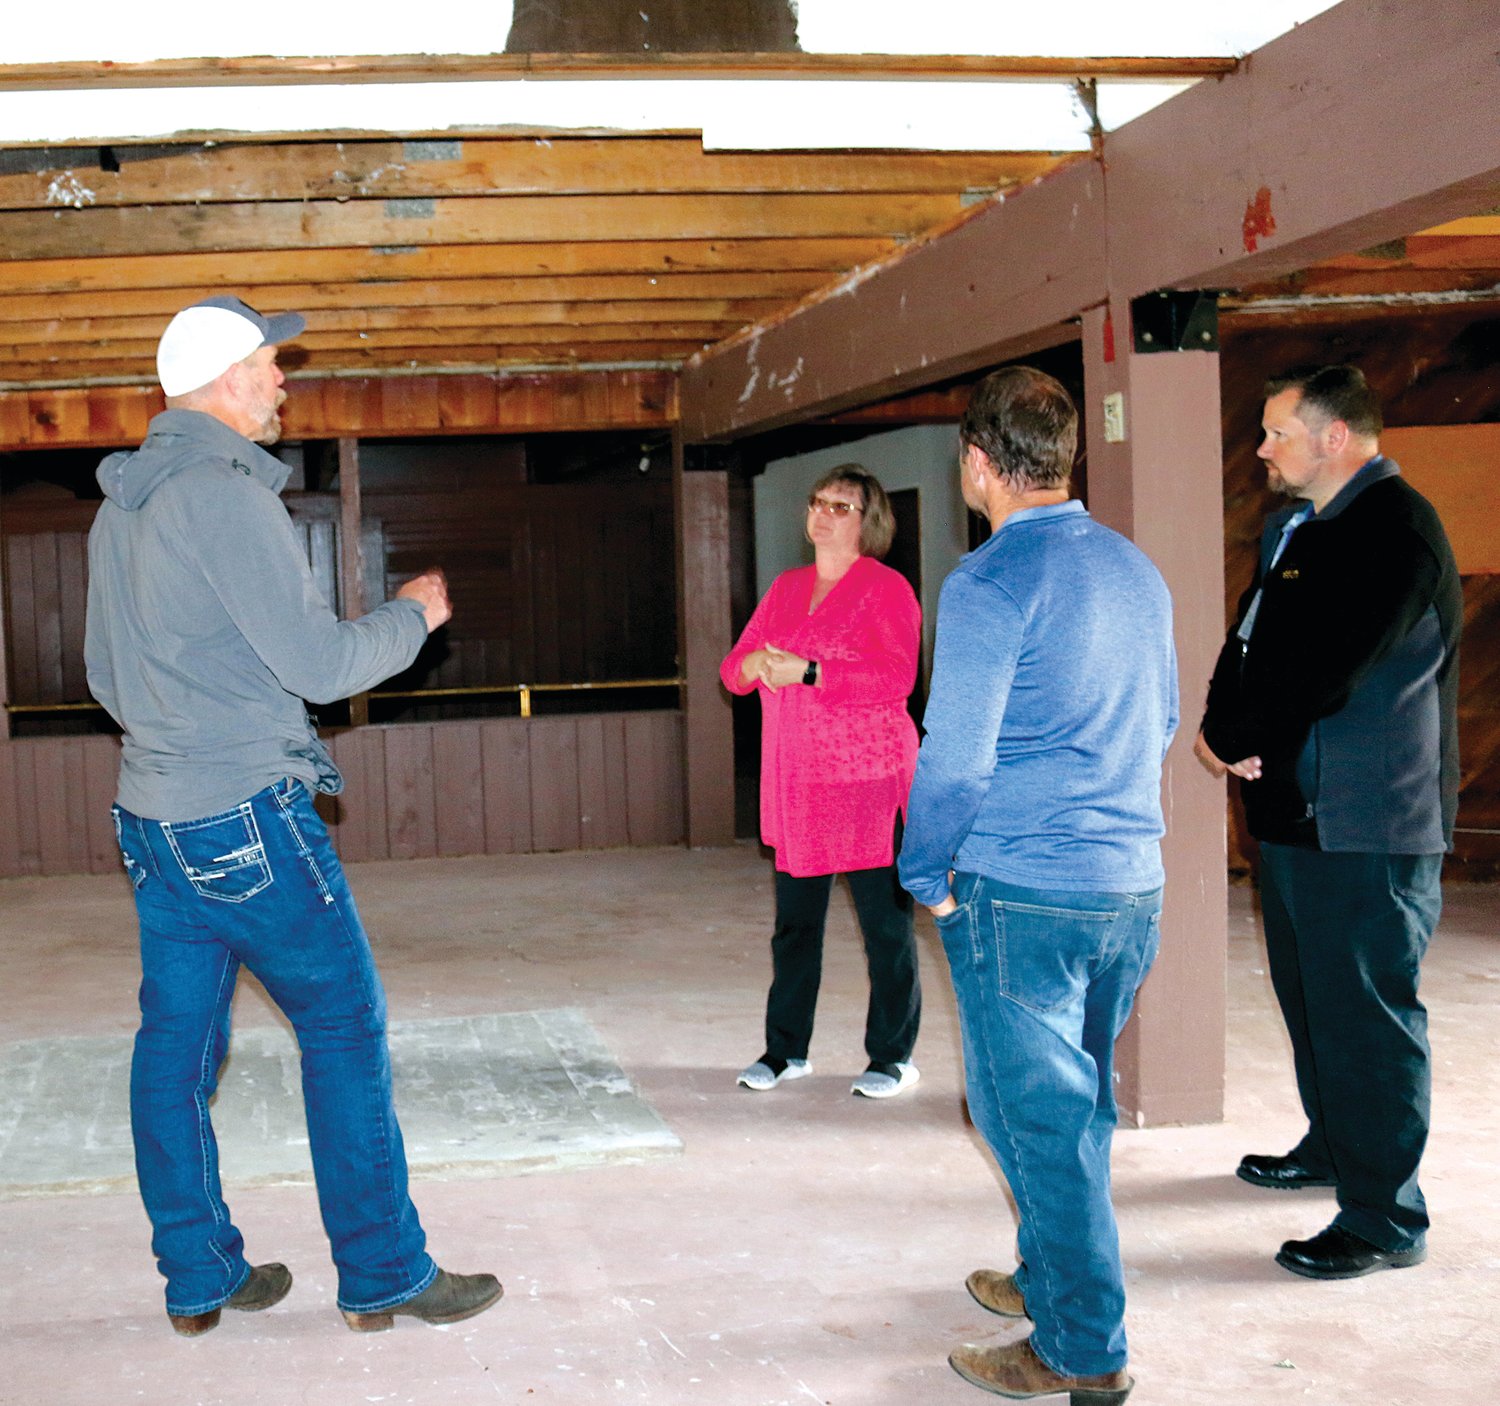 Property Developer Eric Oien of Fiddleback Properties, left, reviews the construction plans with Arbor Health CEO Leianne Everett, center, while Property Developer Brandon Hamrick and Arbor Health Facilities Director Matthew Lindstrom look on.